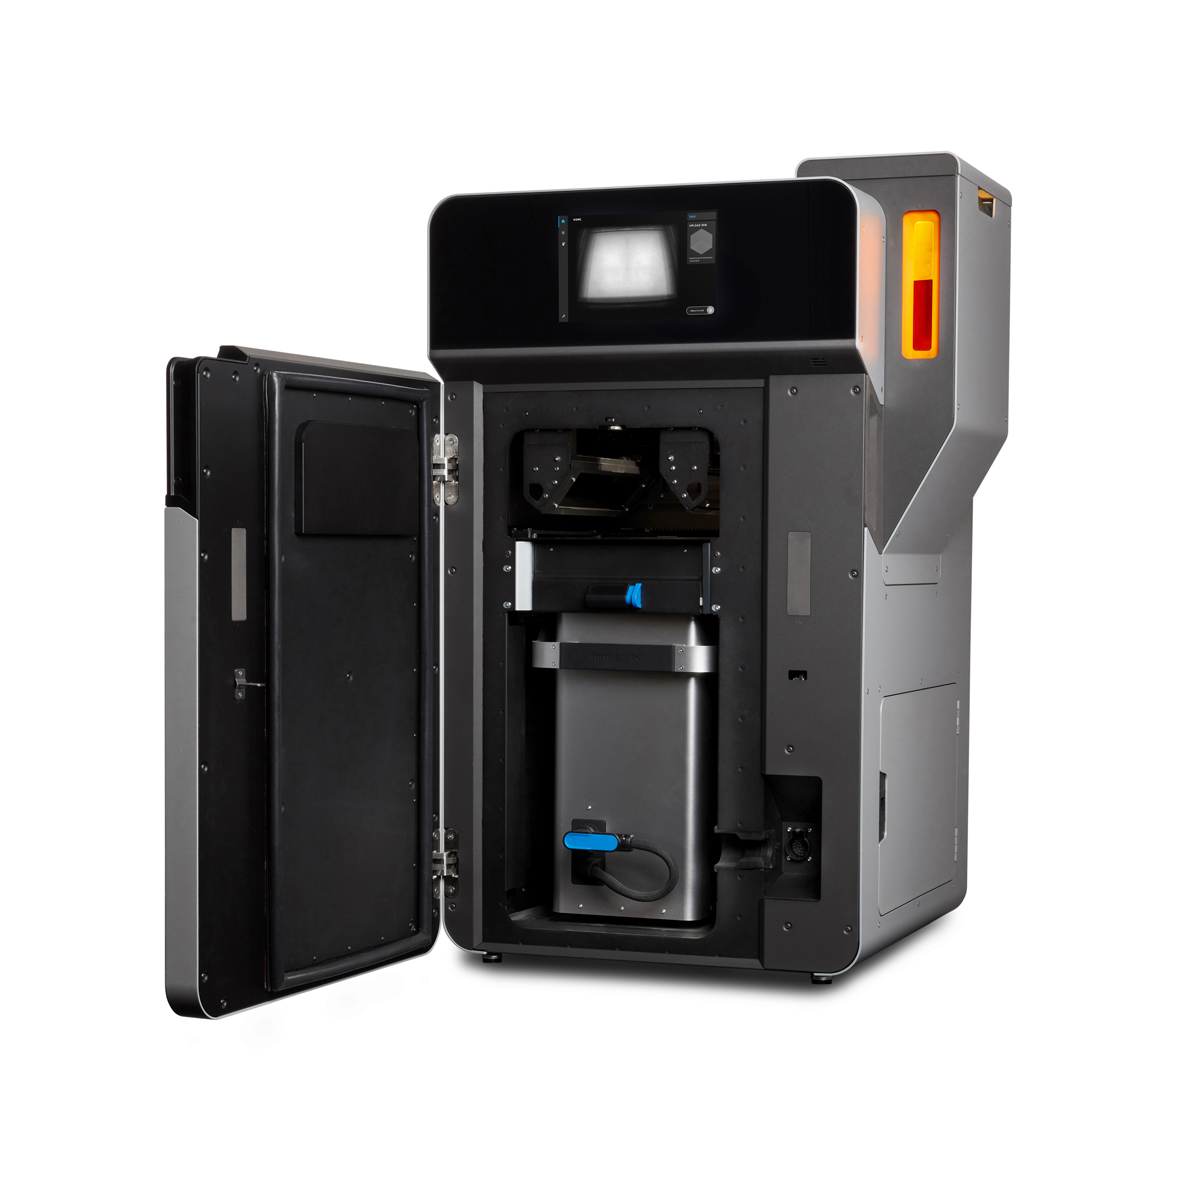 3D printing on 3D printer Formlabs Fuse 1 in 3DDevice